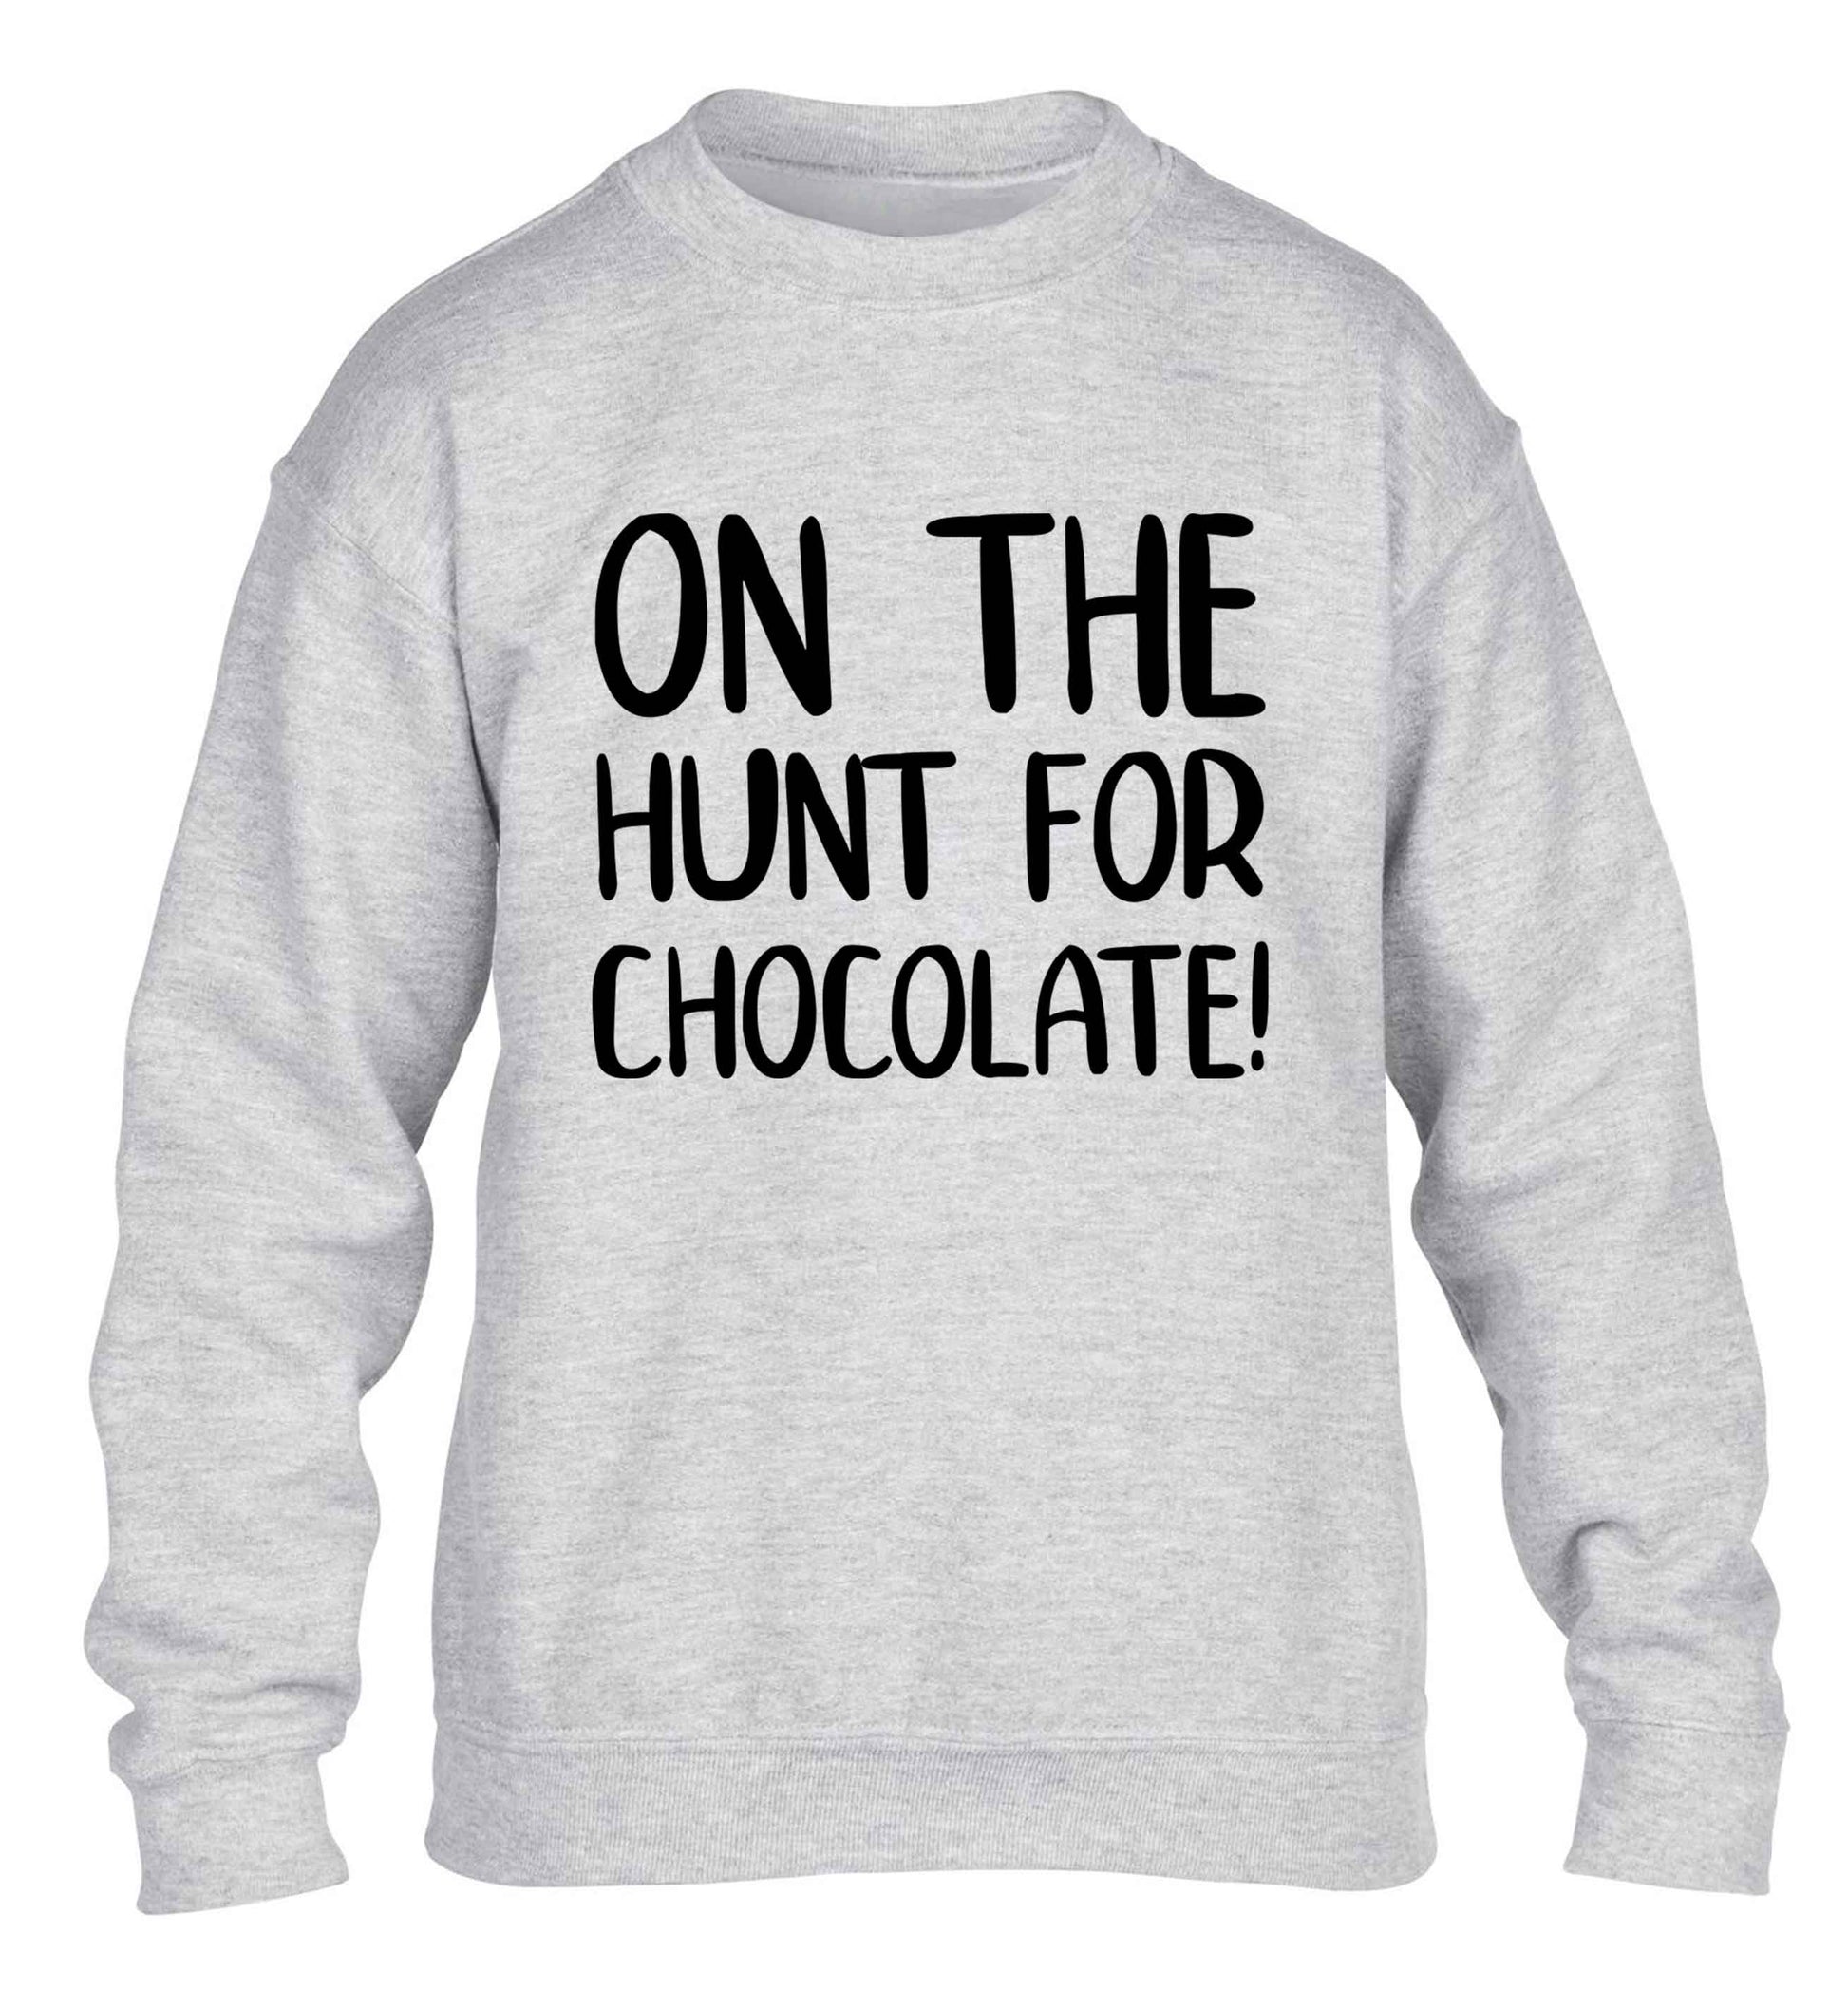 On the hunt for chocolate! children's grey sweater 12-13 Years